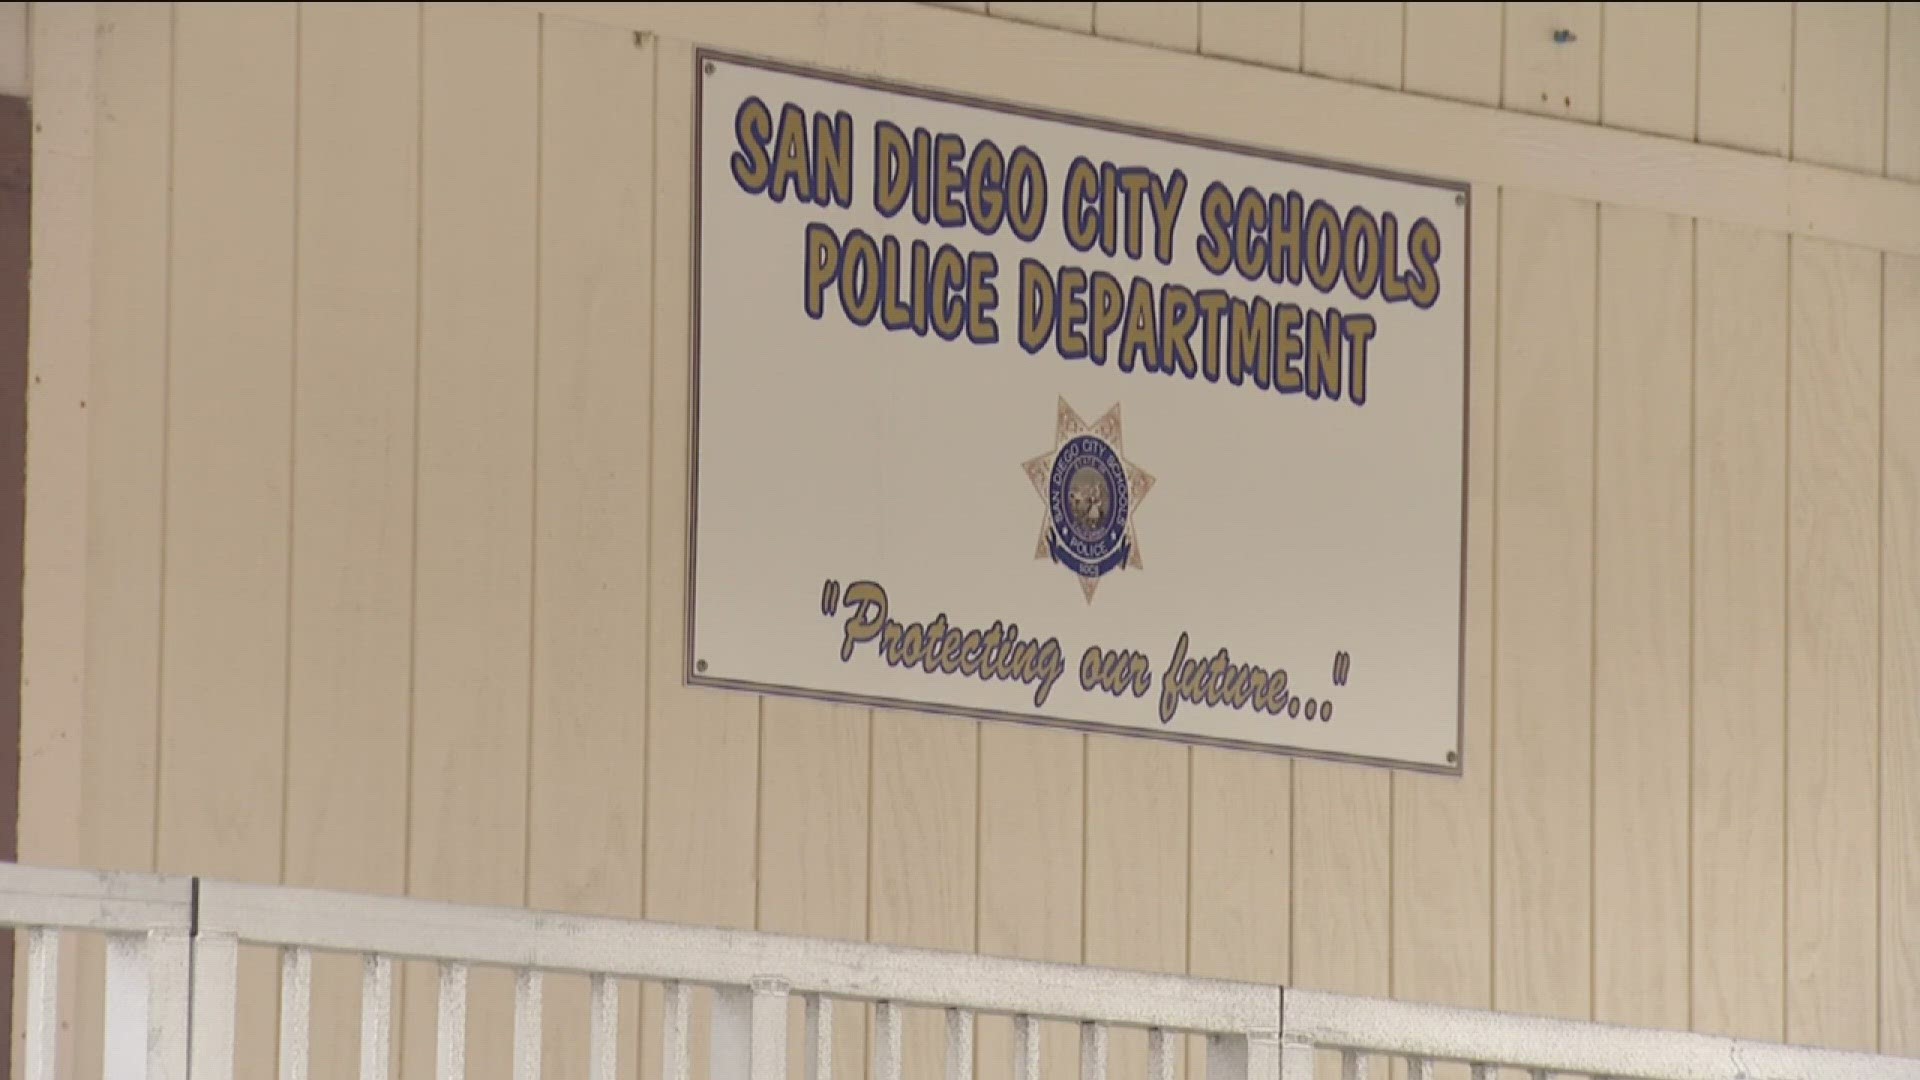 Nearly a dozen officers are suing the district and chief over these allegations as well as claims of corruption, favoritism and retaliation.